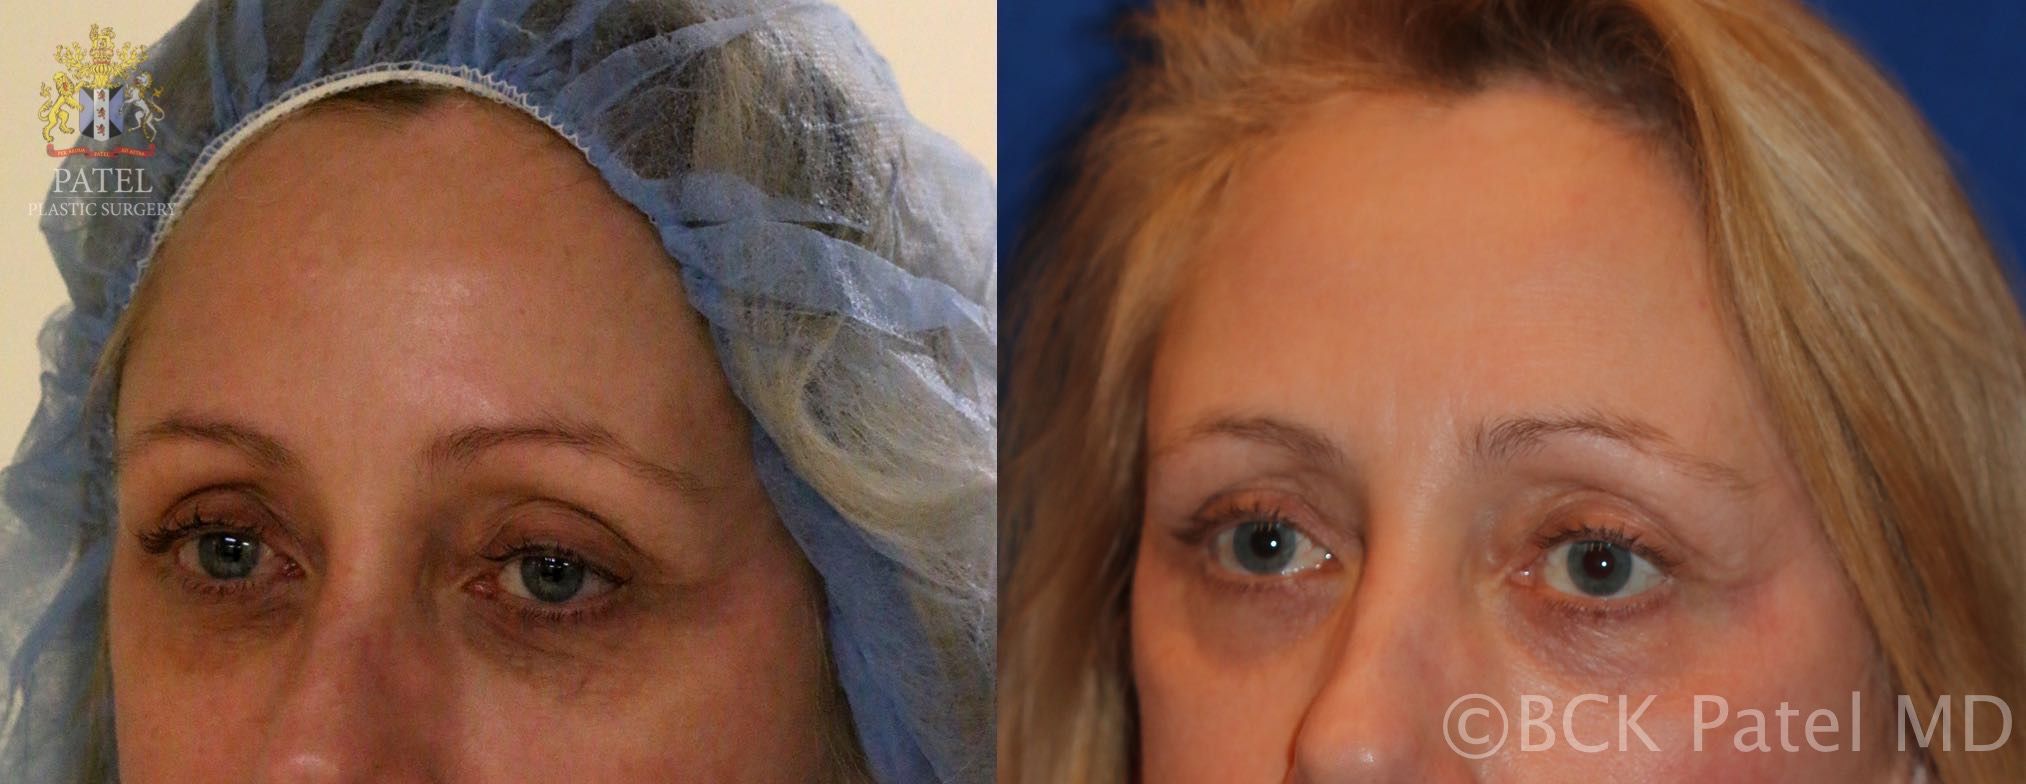 englishsurgeon.com. Before and after photos showing a nice improvement in the colour and texture of lower eyelid skin after fractionated CO2 laser. BCK Patel MD, FRCS, Salt Lake City